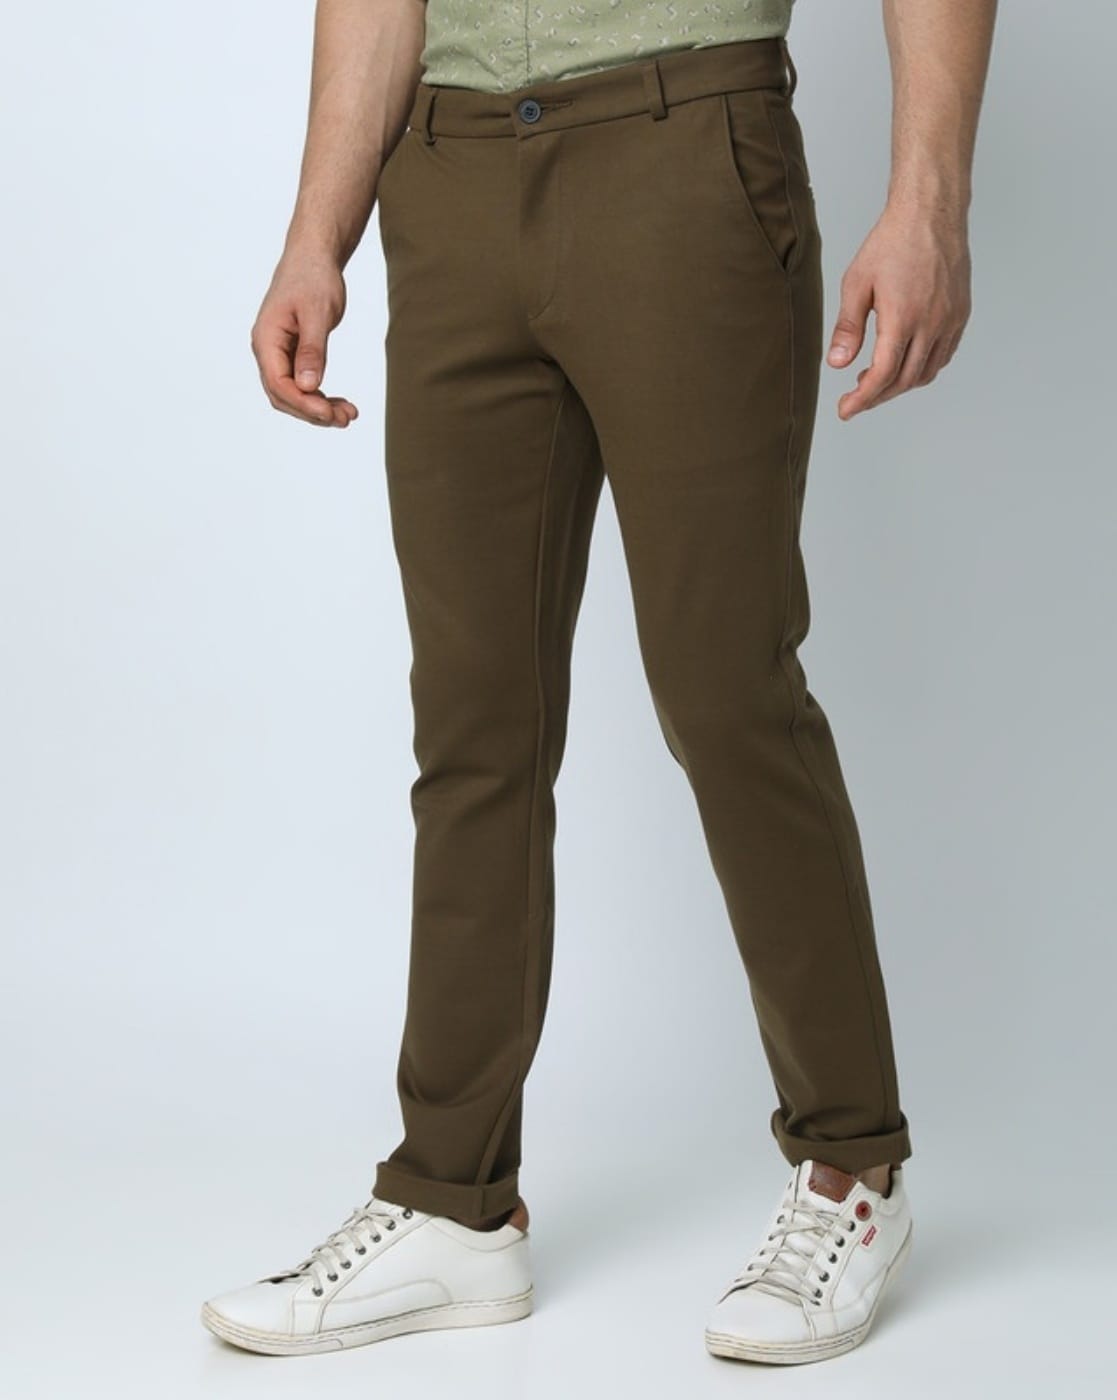 Oxemberg Mens Poly Viscose Super Slim Fit Formal Trousers F7167b Brown Size  38 in Bangalore - Dealers, Manufacturers & Suppliers -Justdial